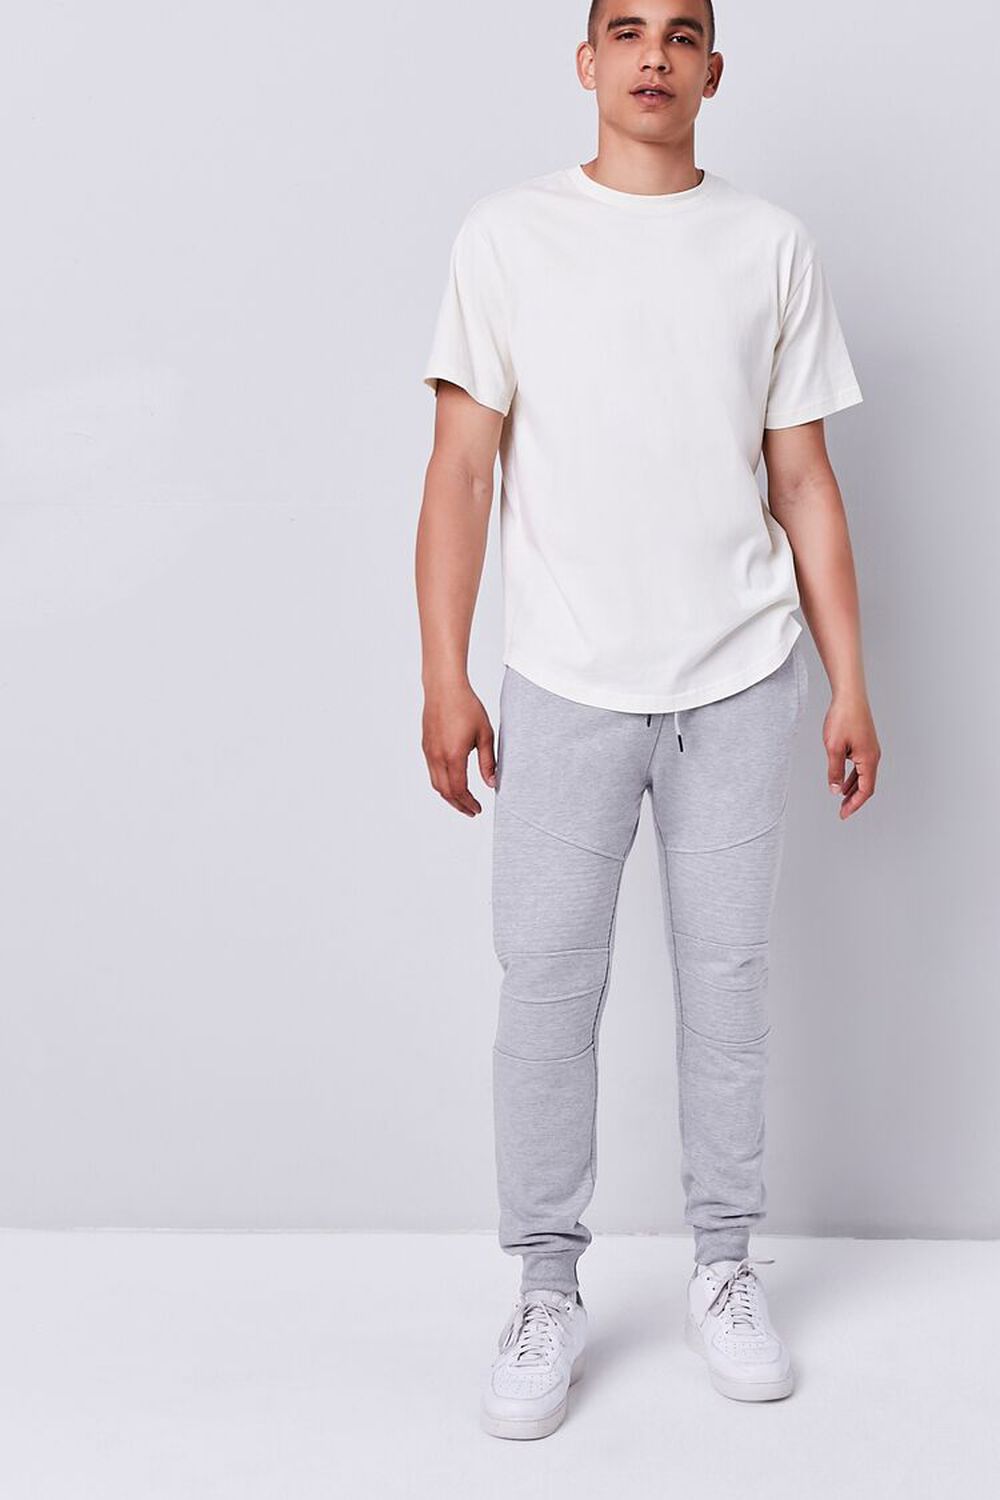 HEATHER GREY Heathered French Terry Moto Joggers, image 1